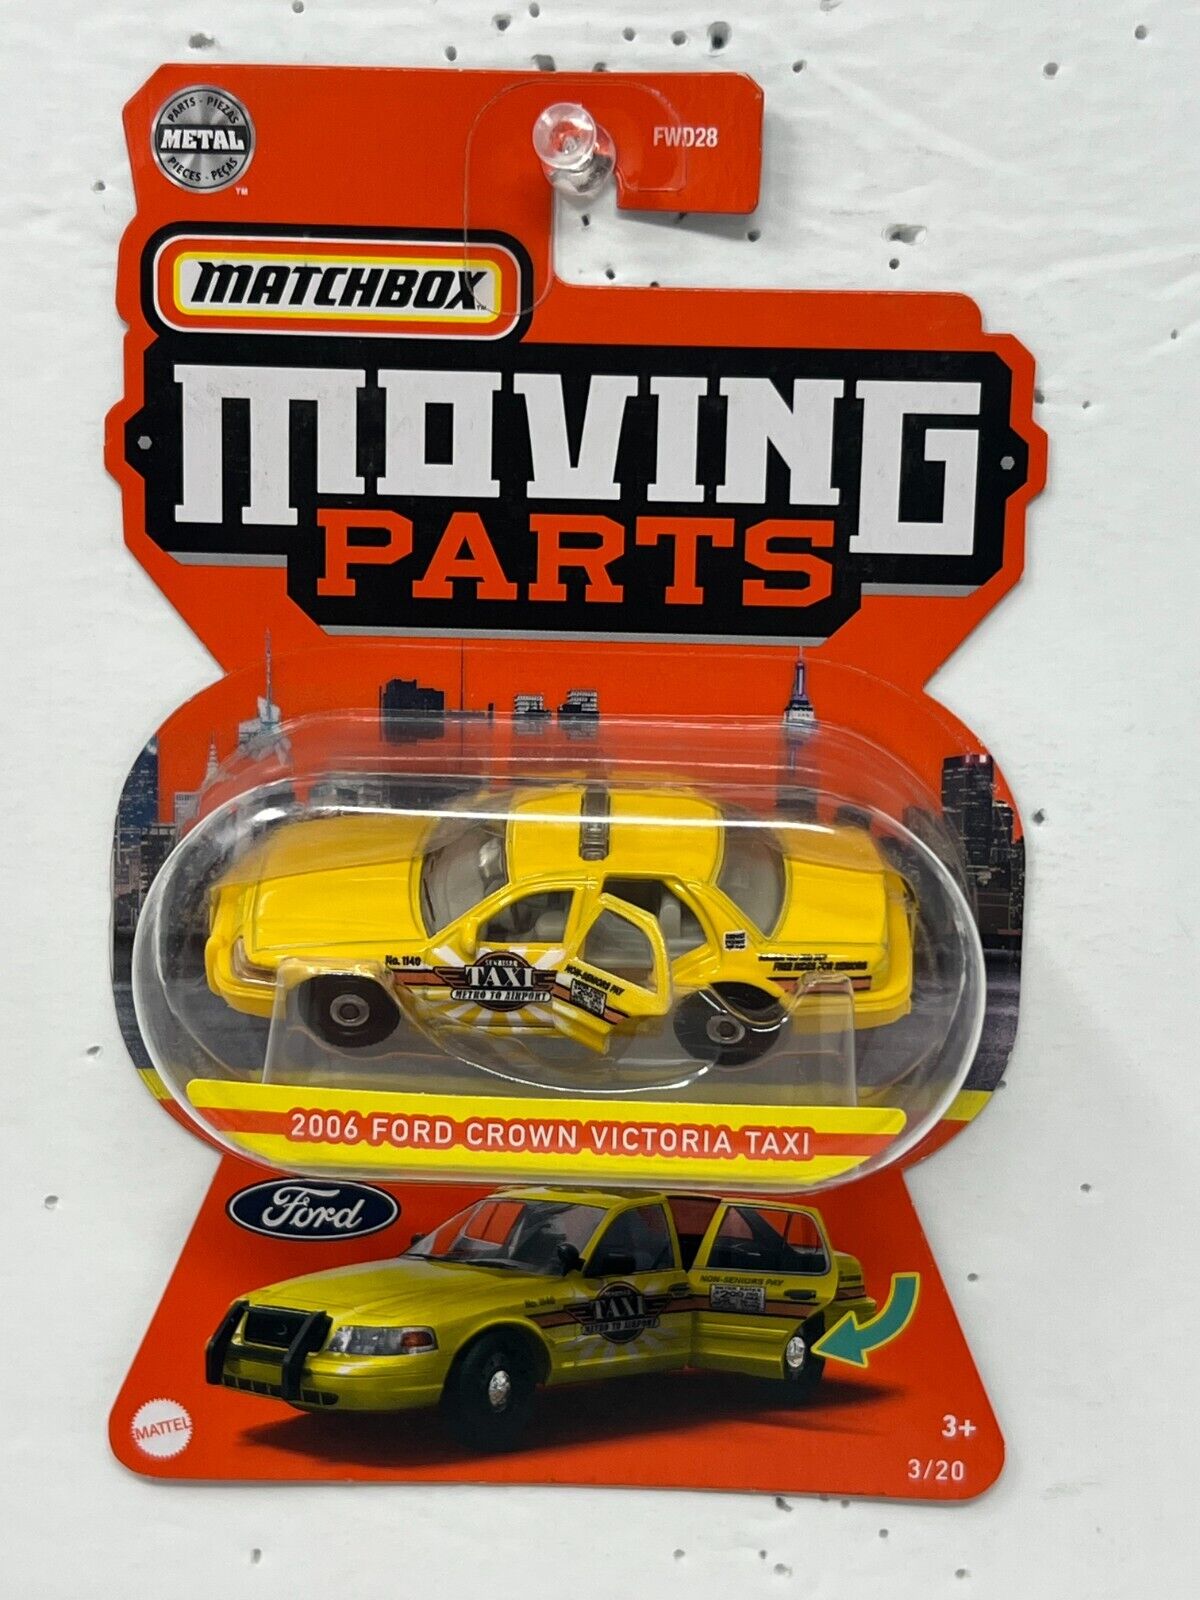 Matchbox Moving Parts 2006 Ford Crown Victoria Taxi 1:64 Diecast